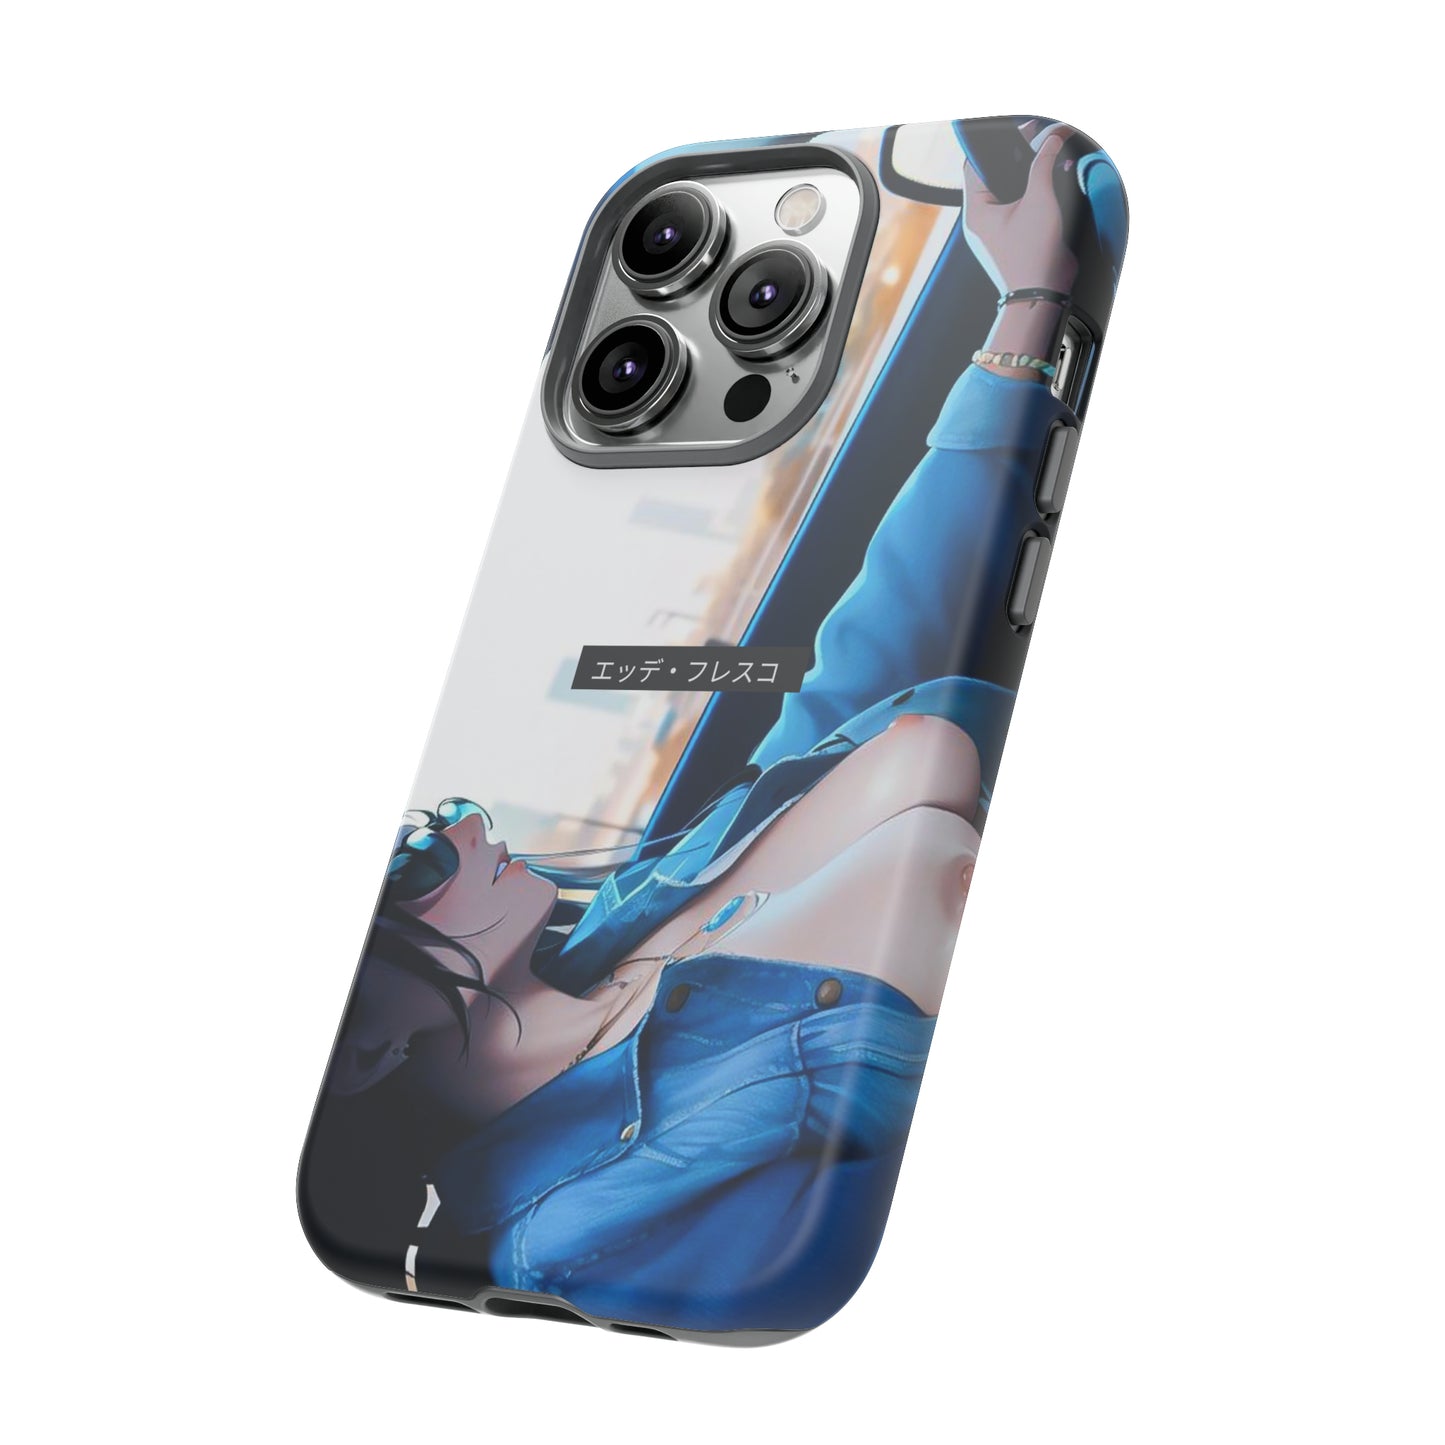 Anime Style Art Tough Cases- "My Driver"